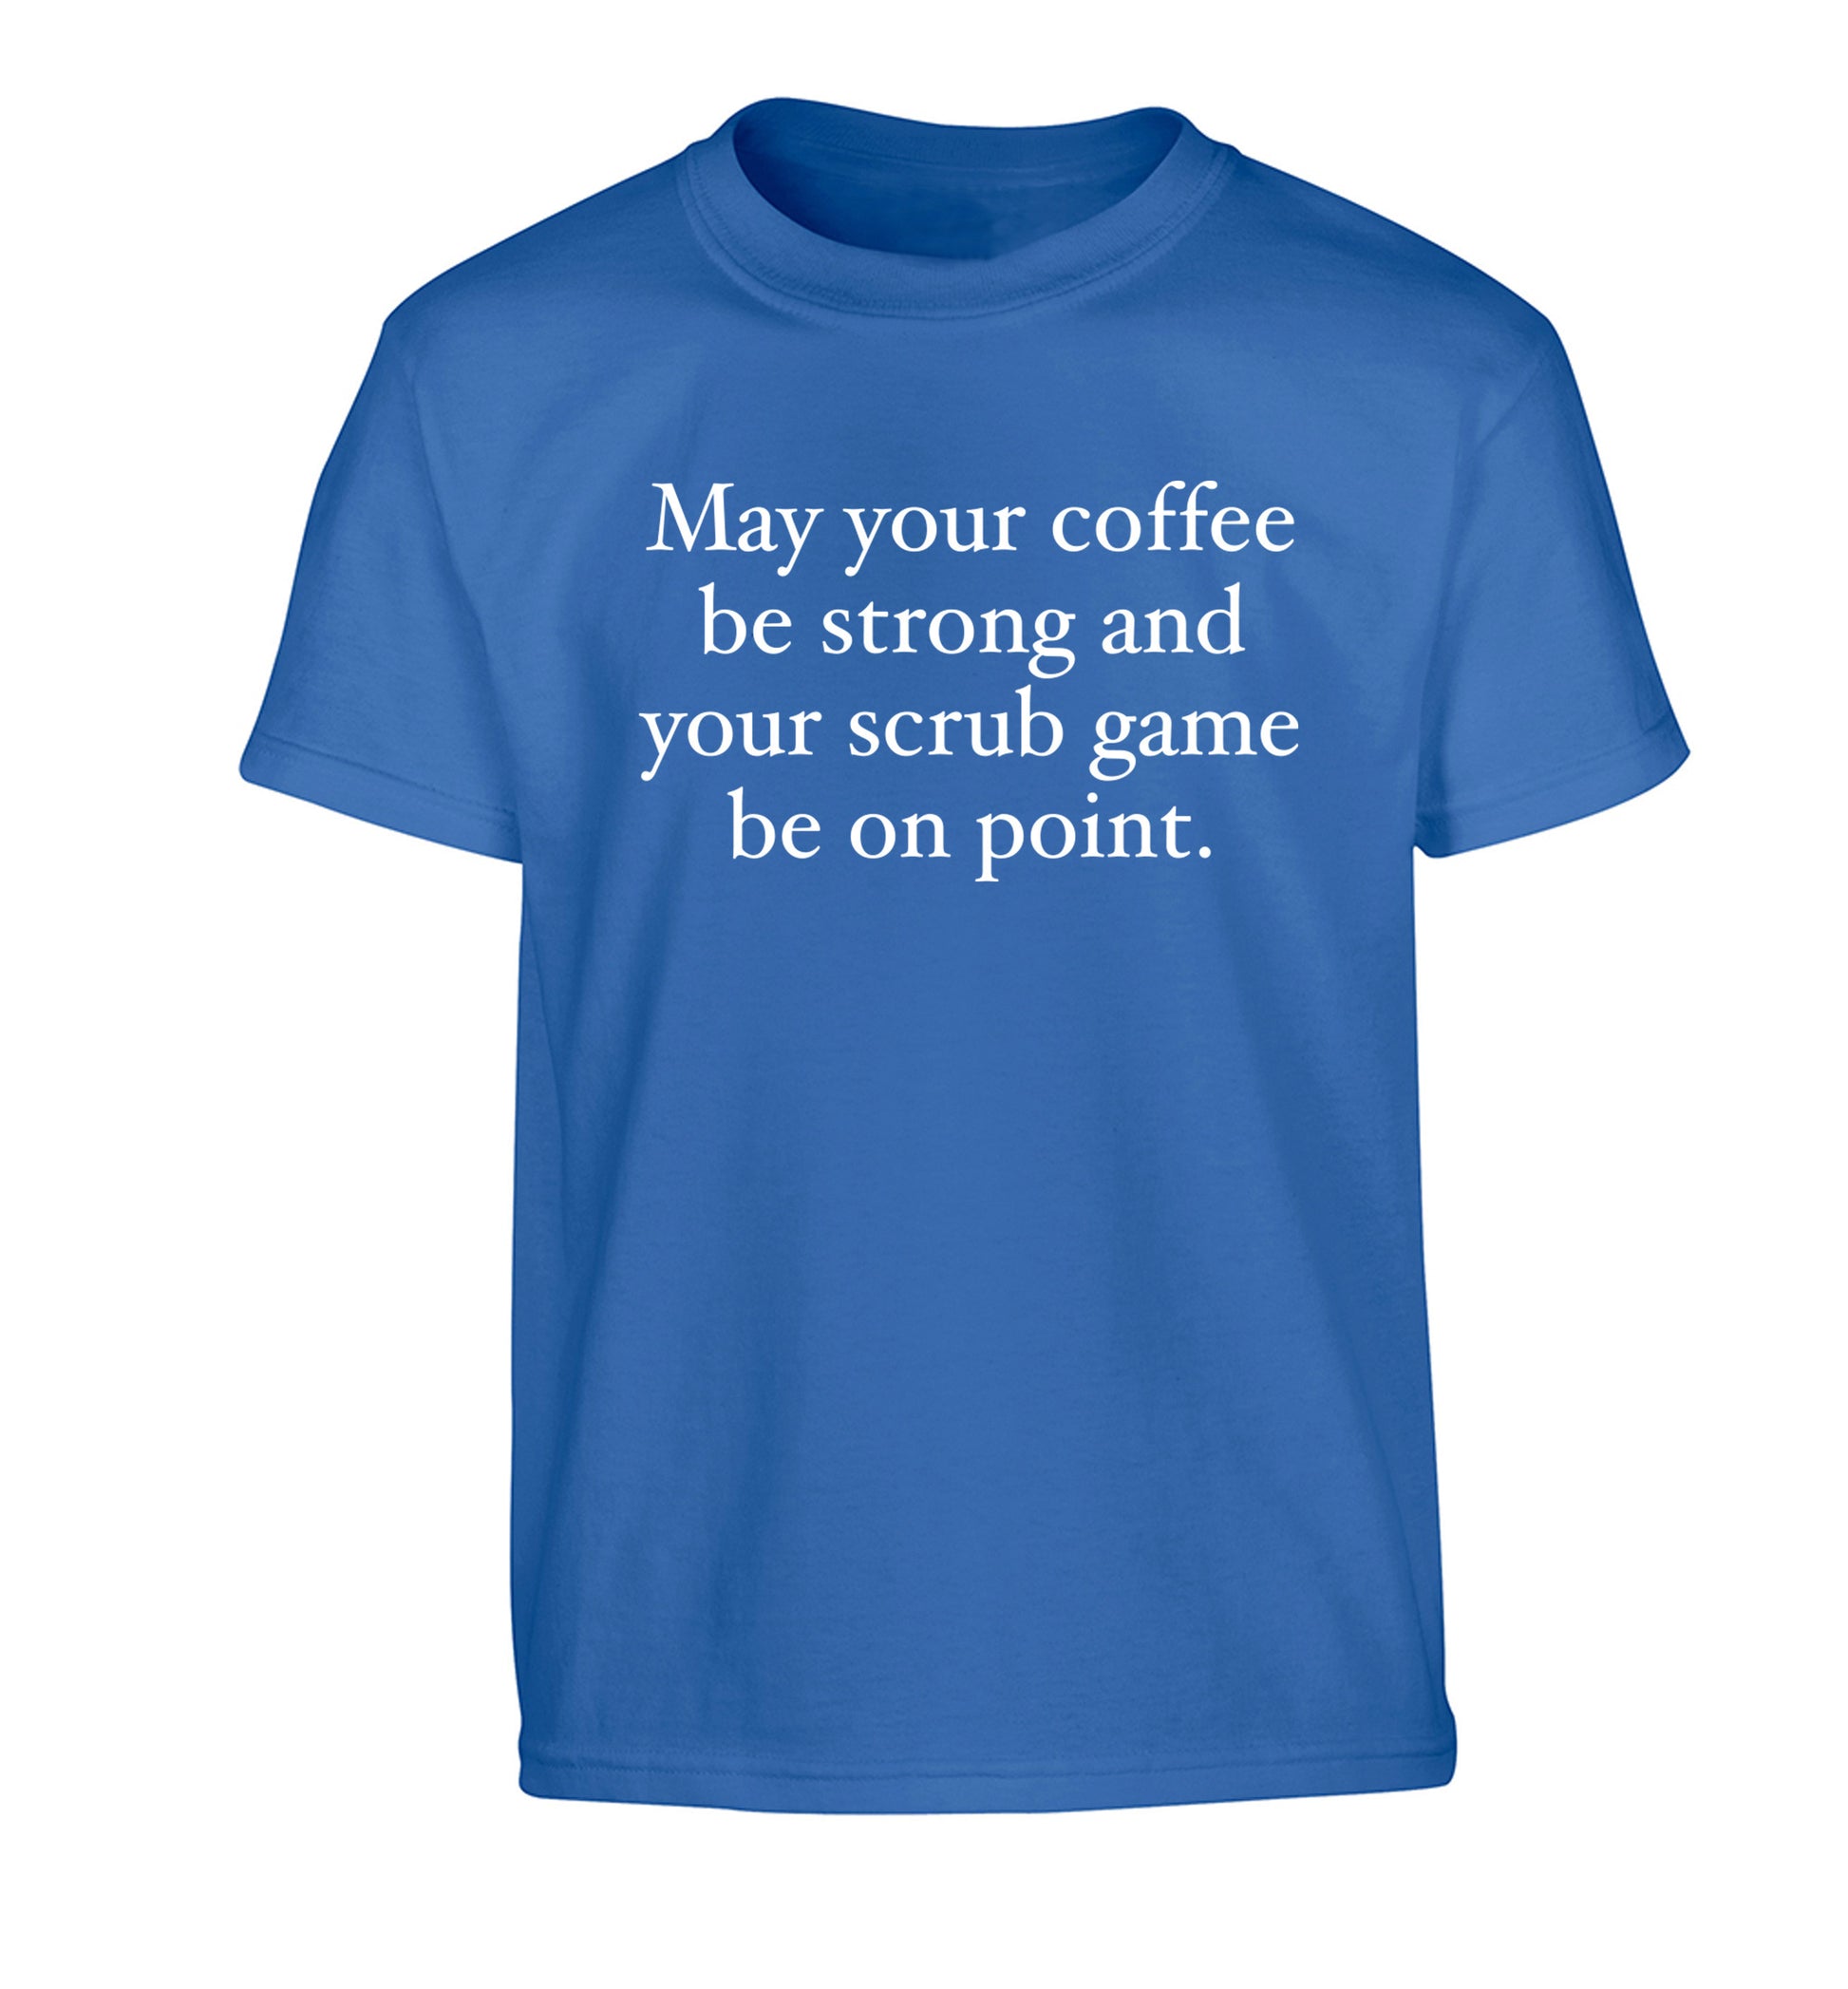 May your caffeine be strong and your scrub game be on point Children's blue Tshirt 12-14 Years